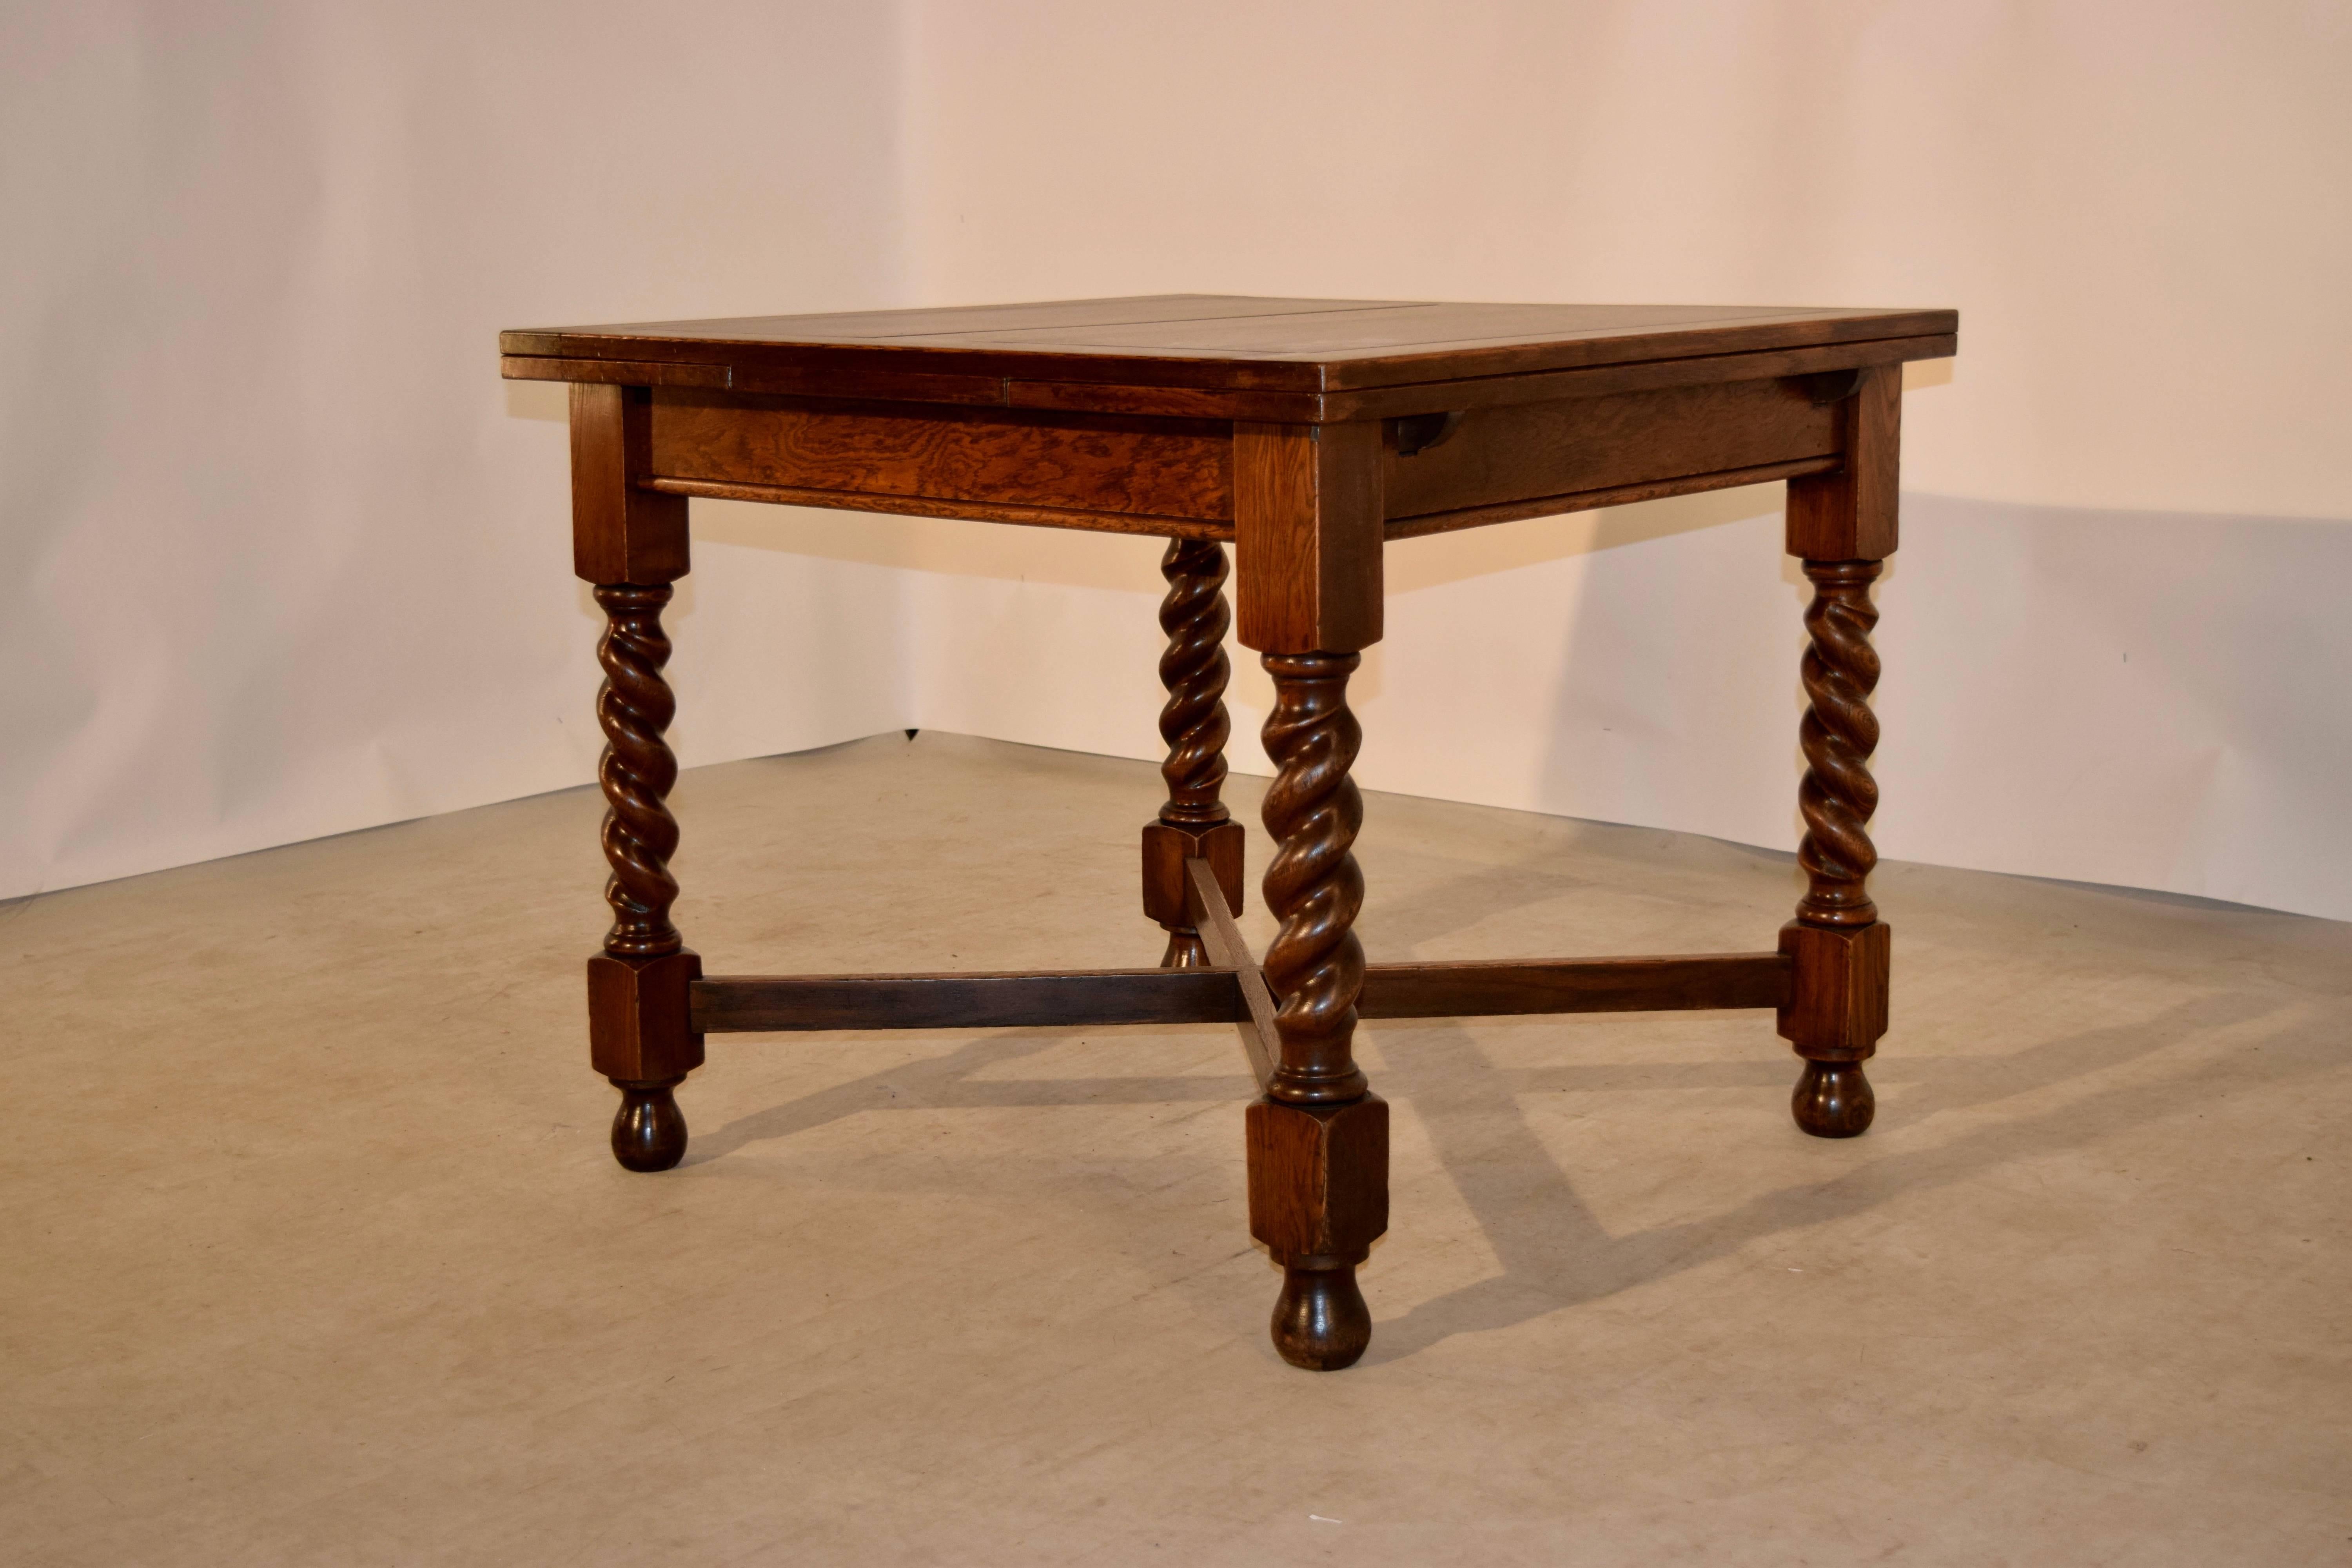 English oak draw-leaf table with panelled top and leaves, following down to a simple apron, and supported on hand turned barley twist legs, which are joined by cross stretchers and supported on turned feet, circa 1900. The top open measures 59.63 x